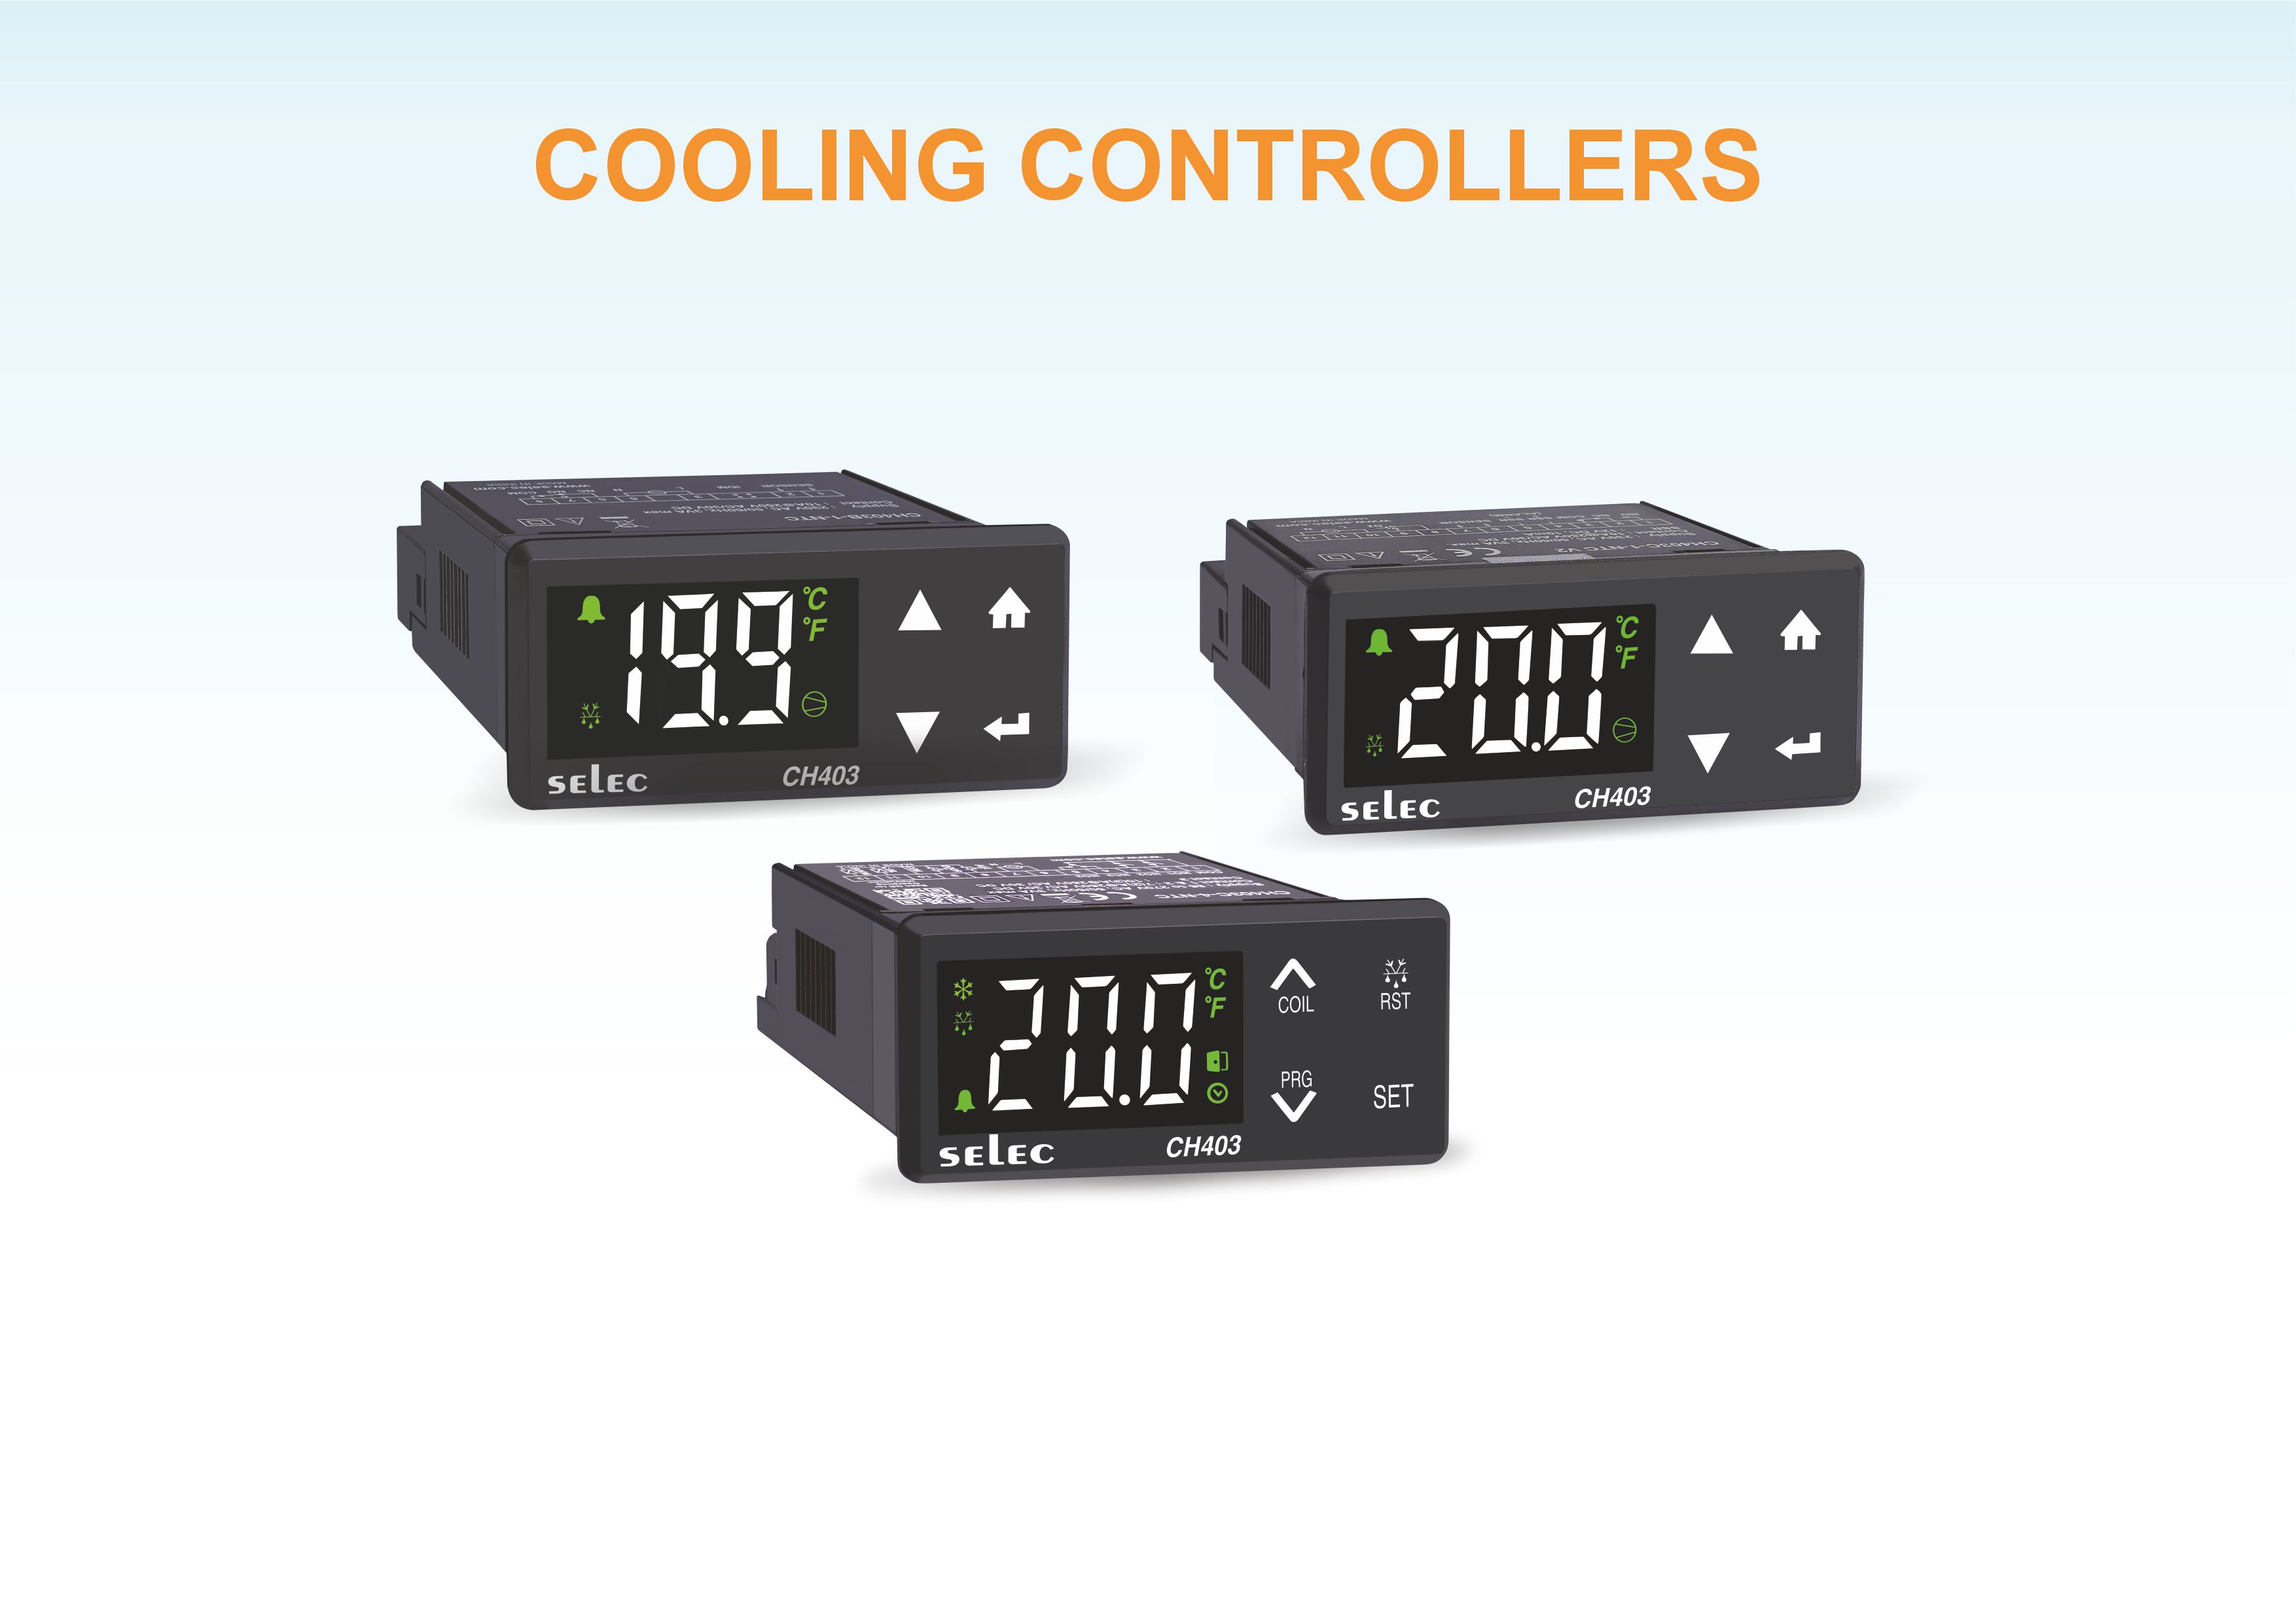 Cooling Controllers